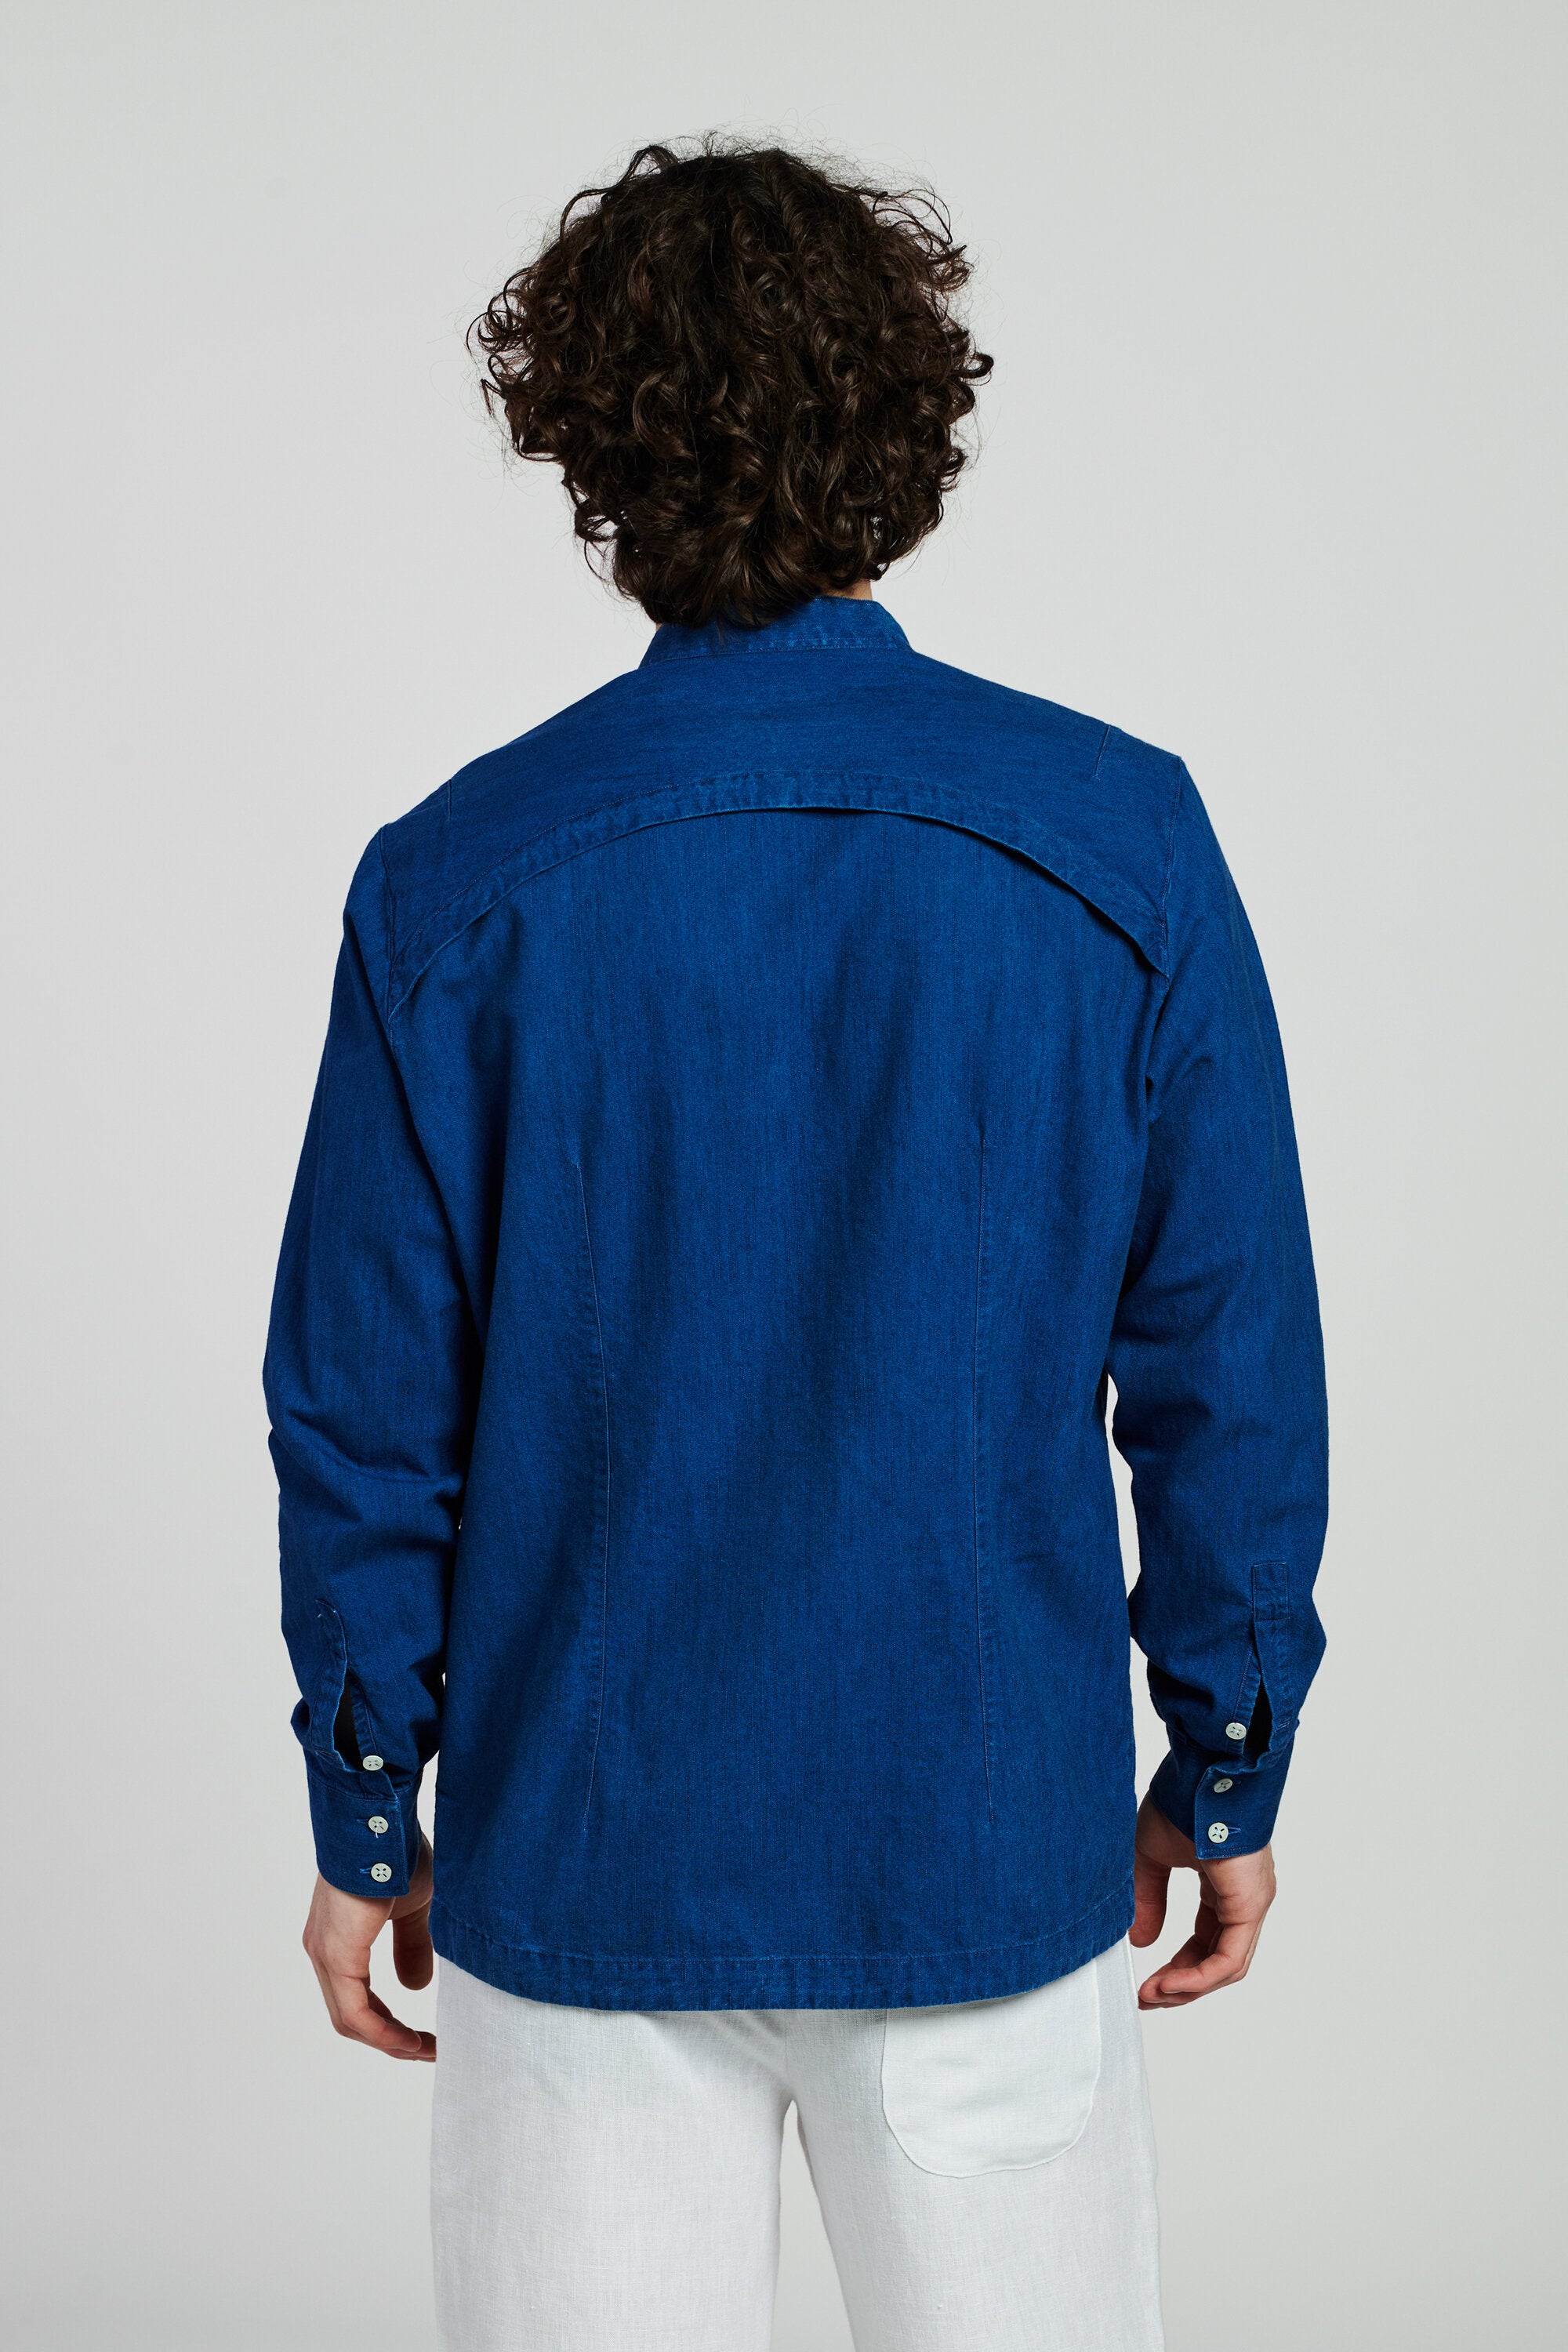 Confident Overshirt in a Bright Blue Indigo Dyed Italian Cotton